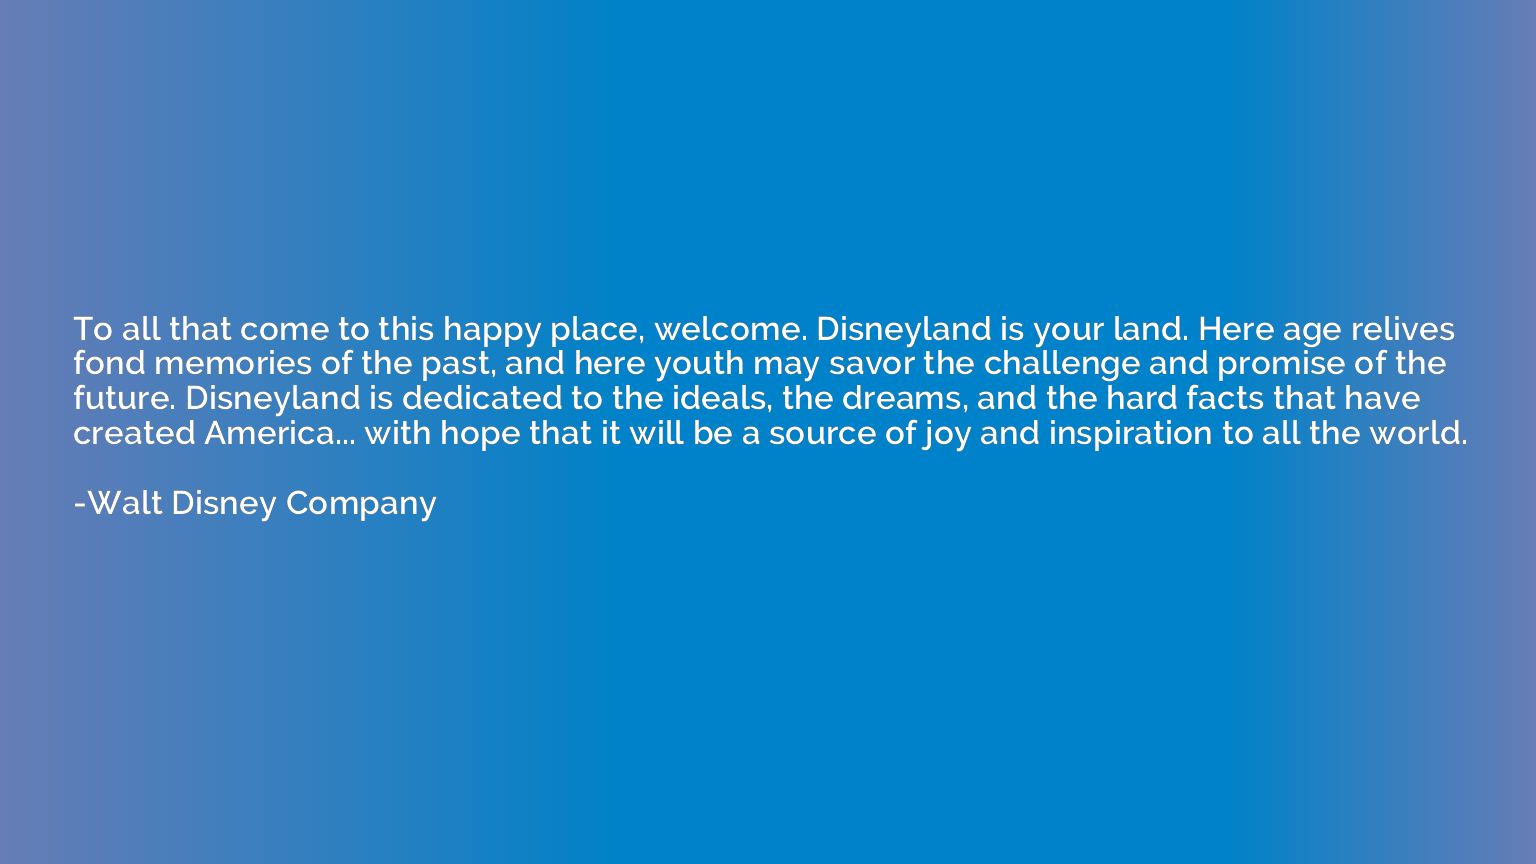 To all that come to this happy place, welcome. Disneyland is